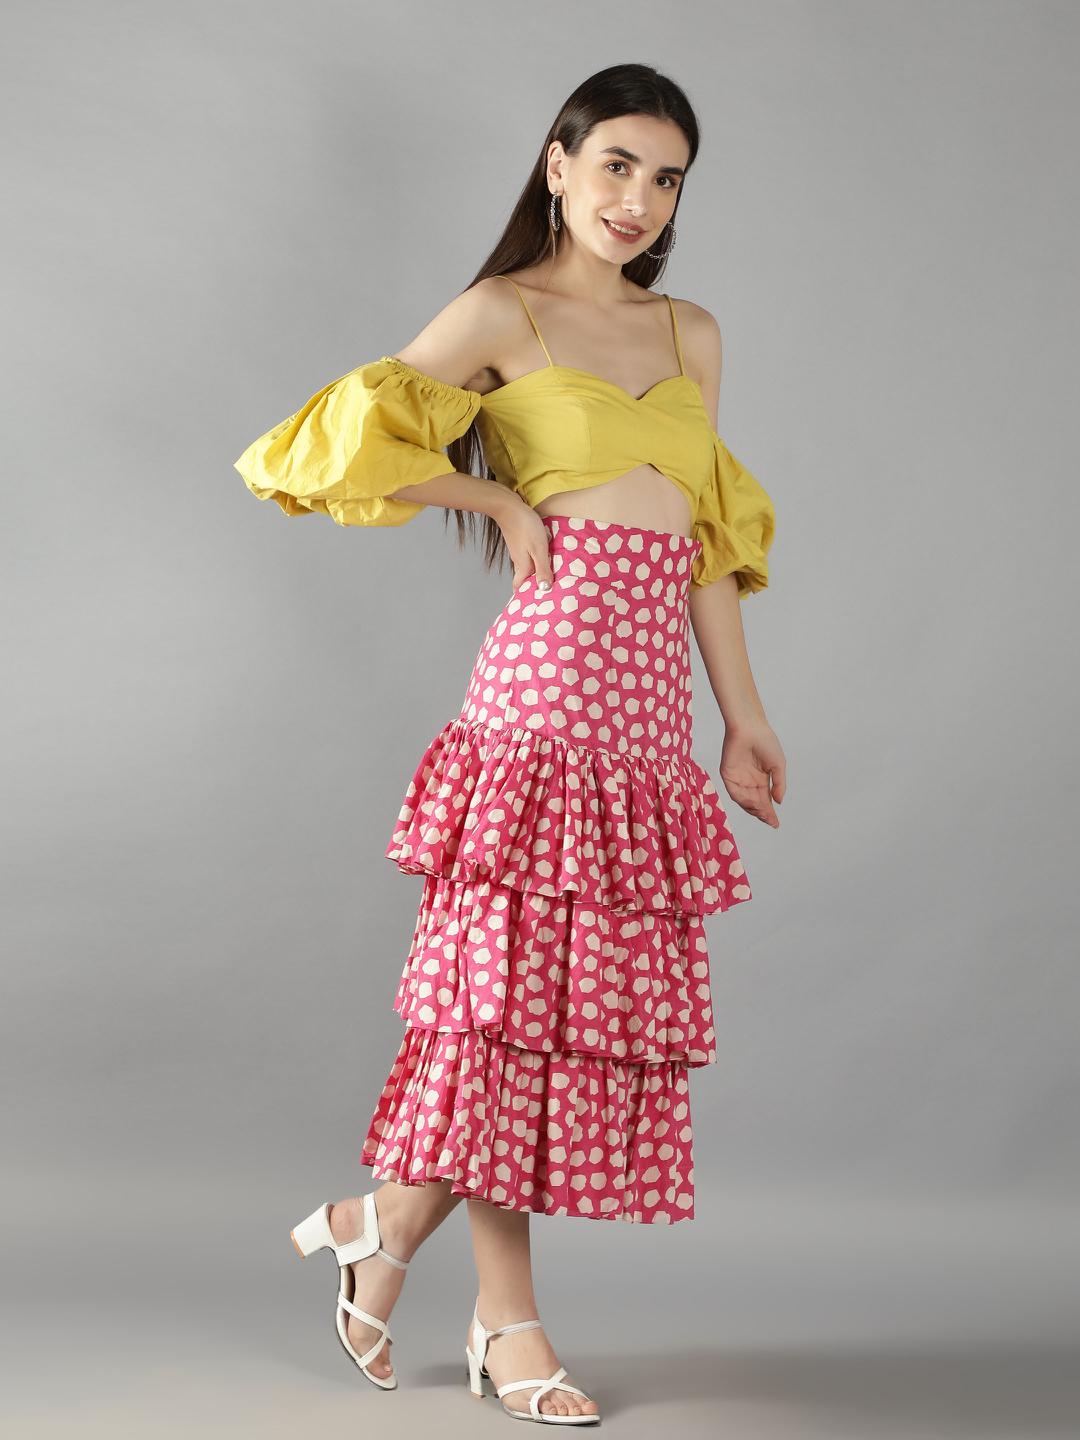 lime-yellow-off-shoulder-top-with-retro-pink-polka-dots-layered-skirt-11740120YL, Women Clothing, Cotton Matching Set